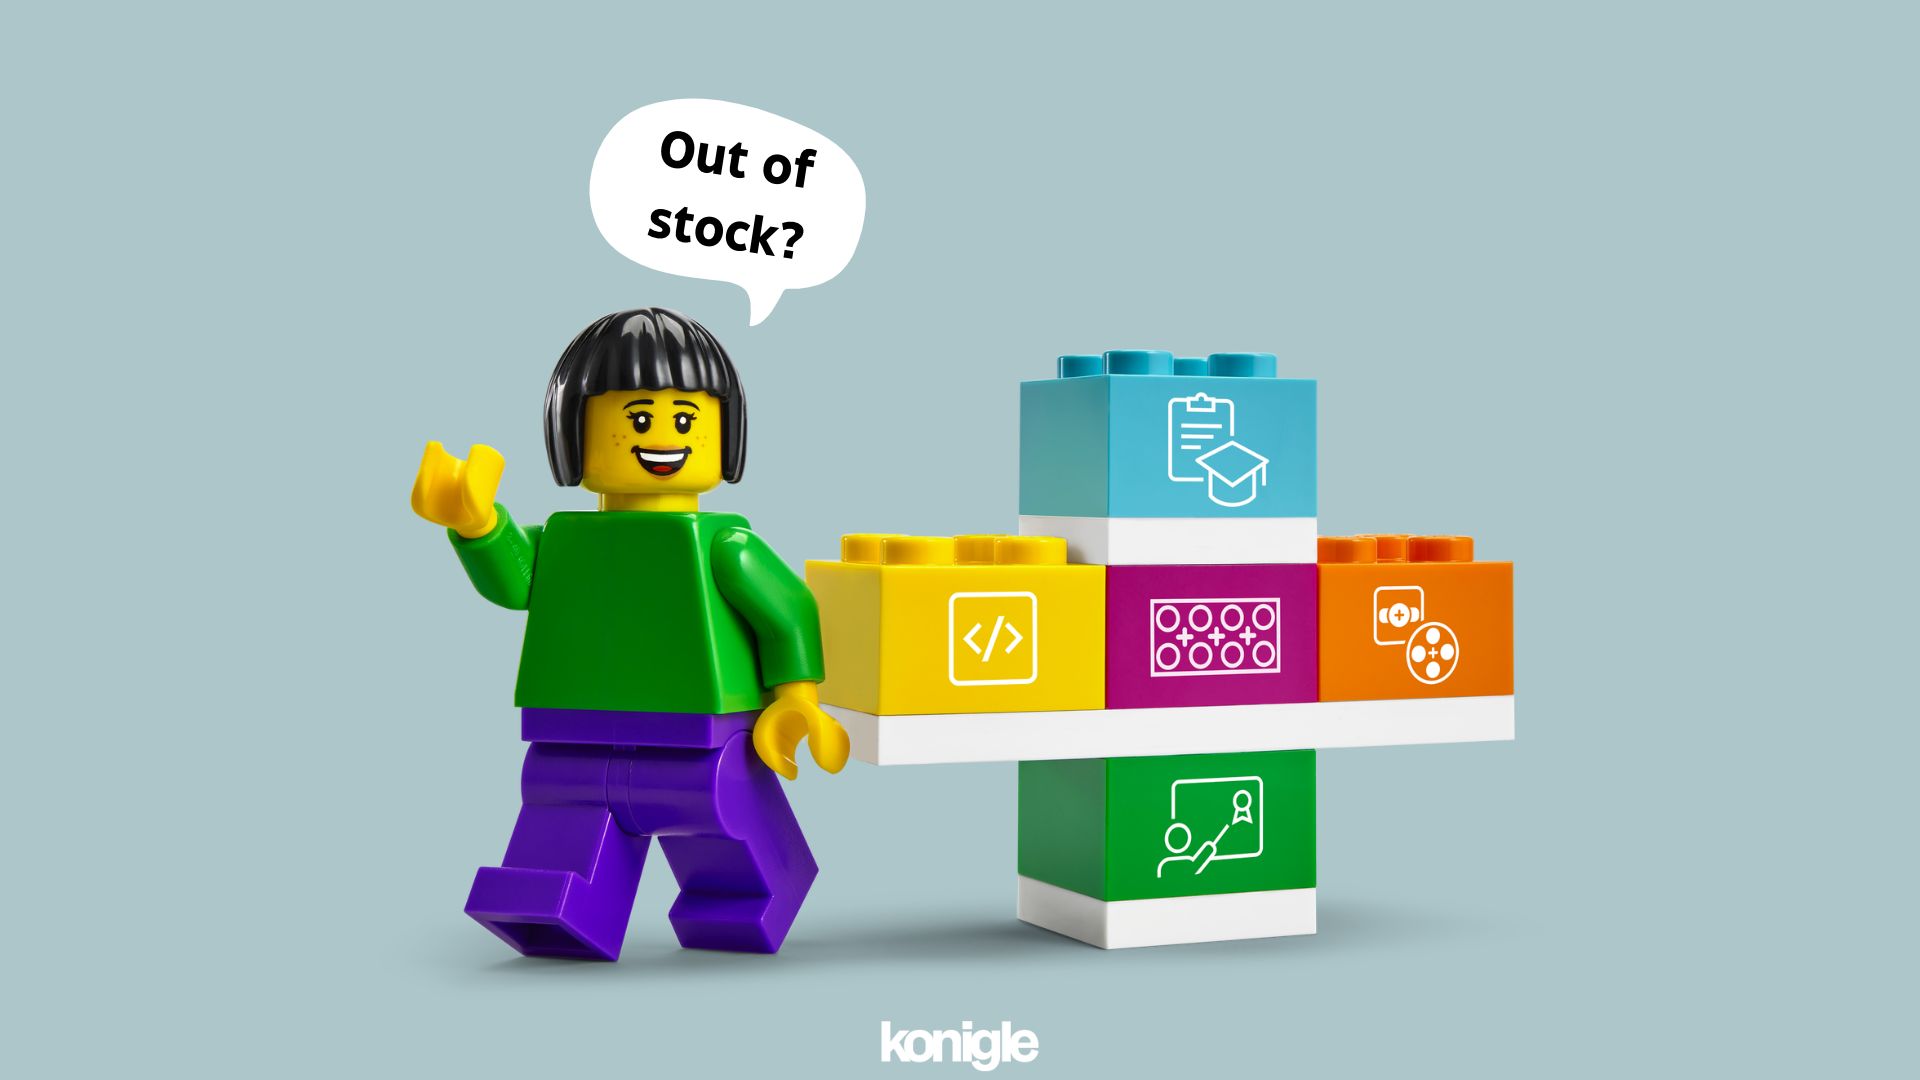 LEGO shows us an alternative tactic to deal with stock outs